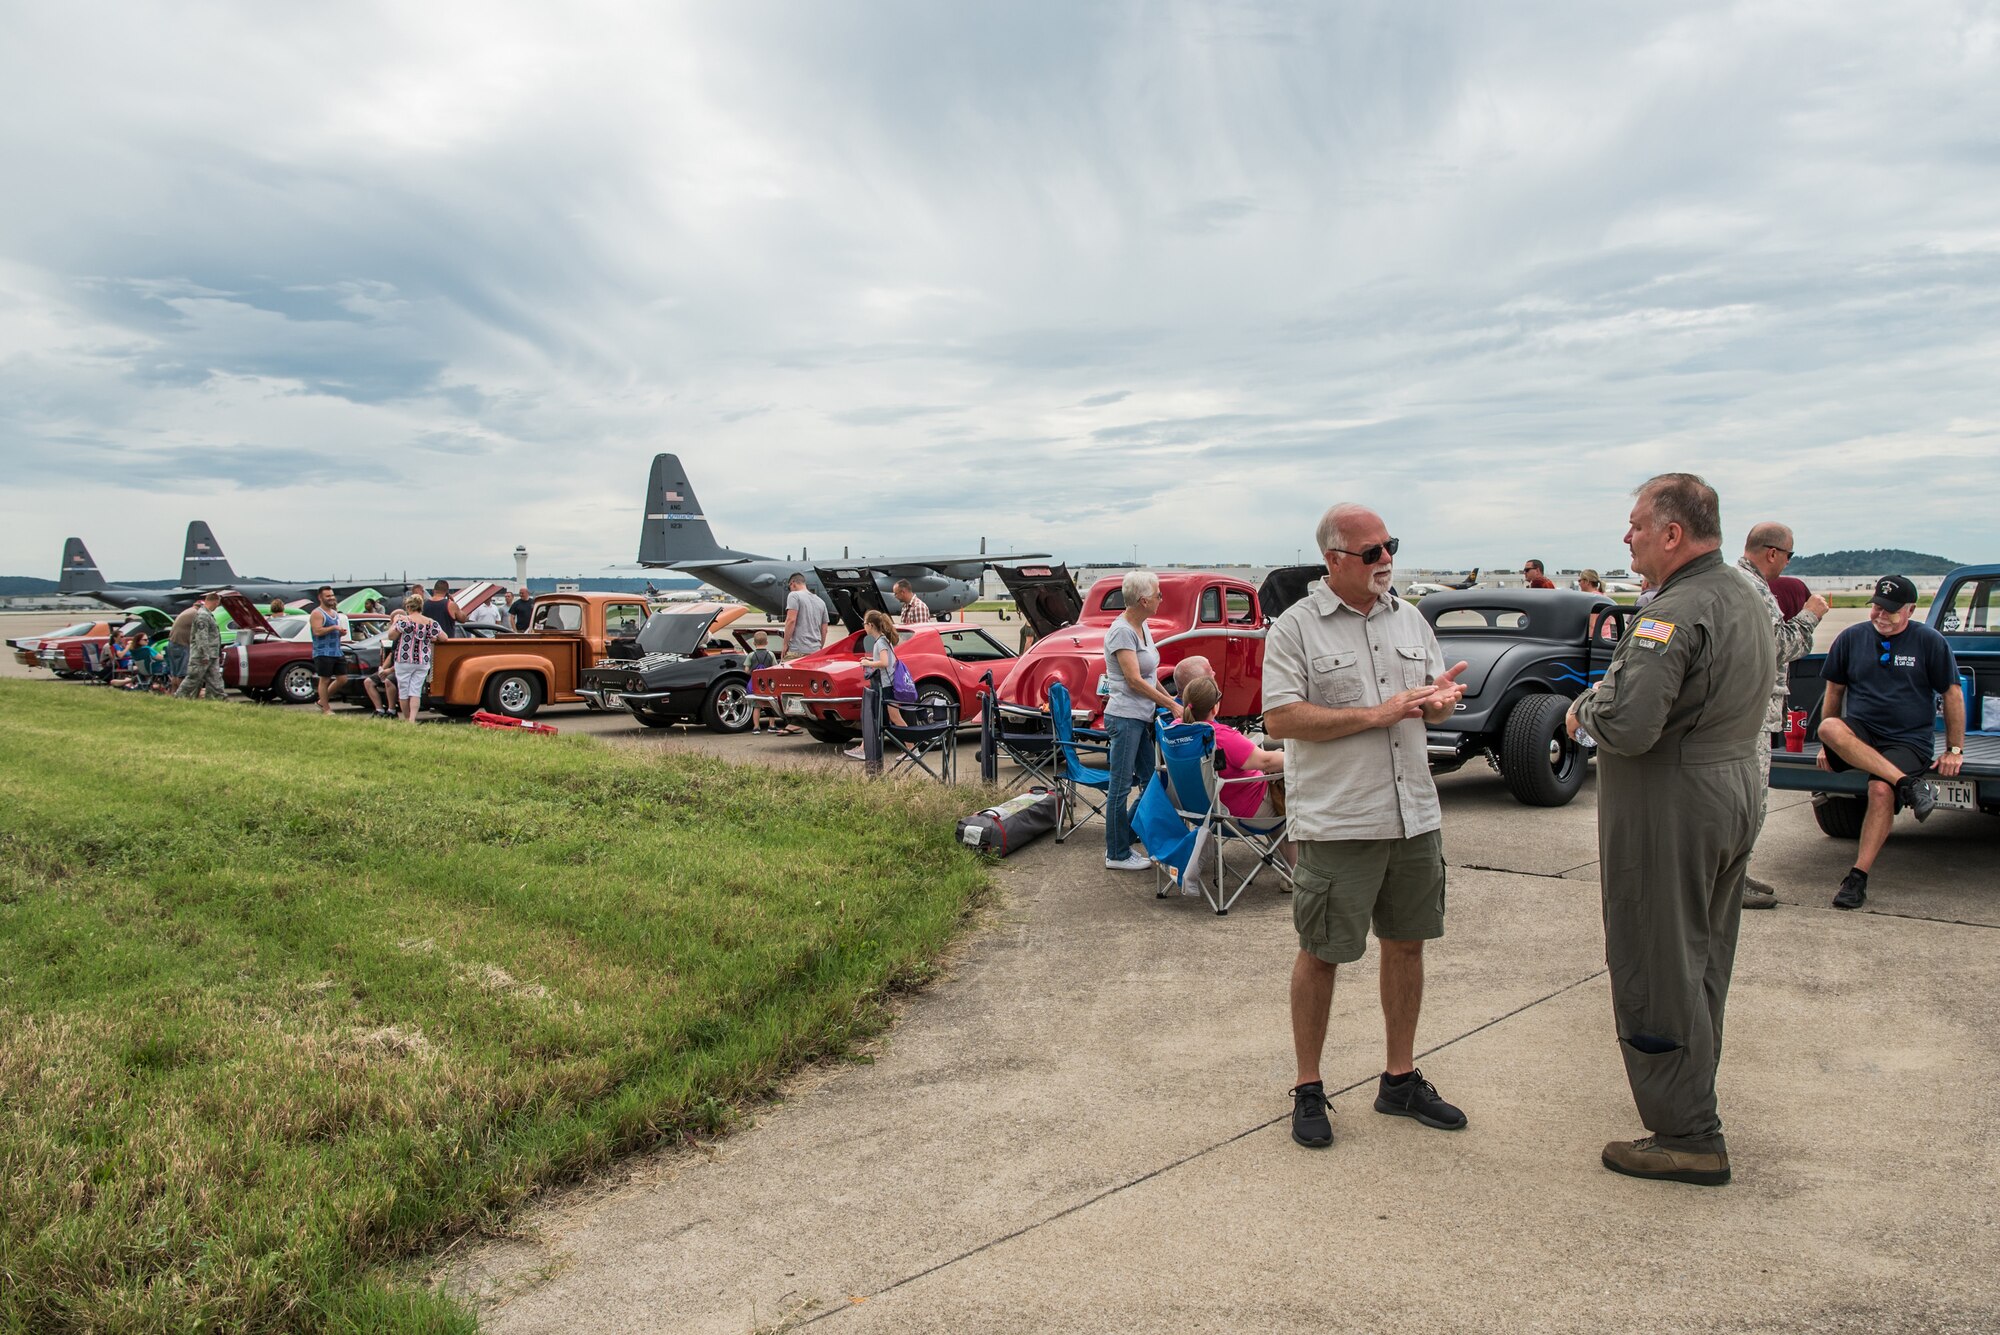 More than 1,000 Airmen, family members and retirees attendeded the 123rd Airlift Wing’s Family Day at the Kentucky Air National Guard Base in Louisville, Ky., Sept. 16, 2018. The event, which was sponsored by the Airman and Family Readiness Office and the Key Volunteer Group, featured a car show, a static-display C-130 Hercules aircraft and several other activities. (U.S. Air National Guard Photo by Staff Sgt. Joshua Horton)